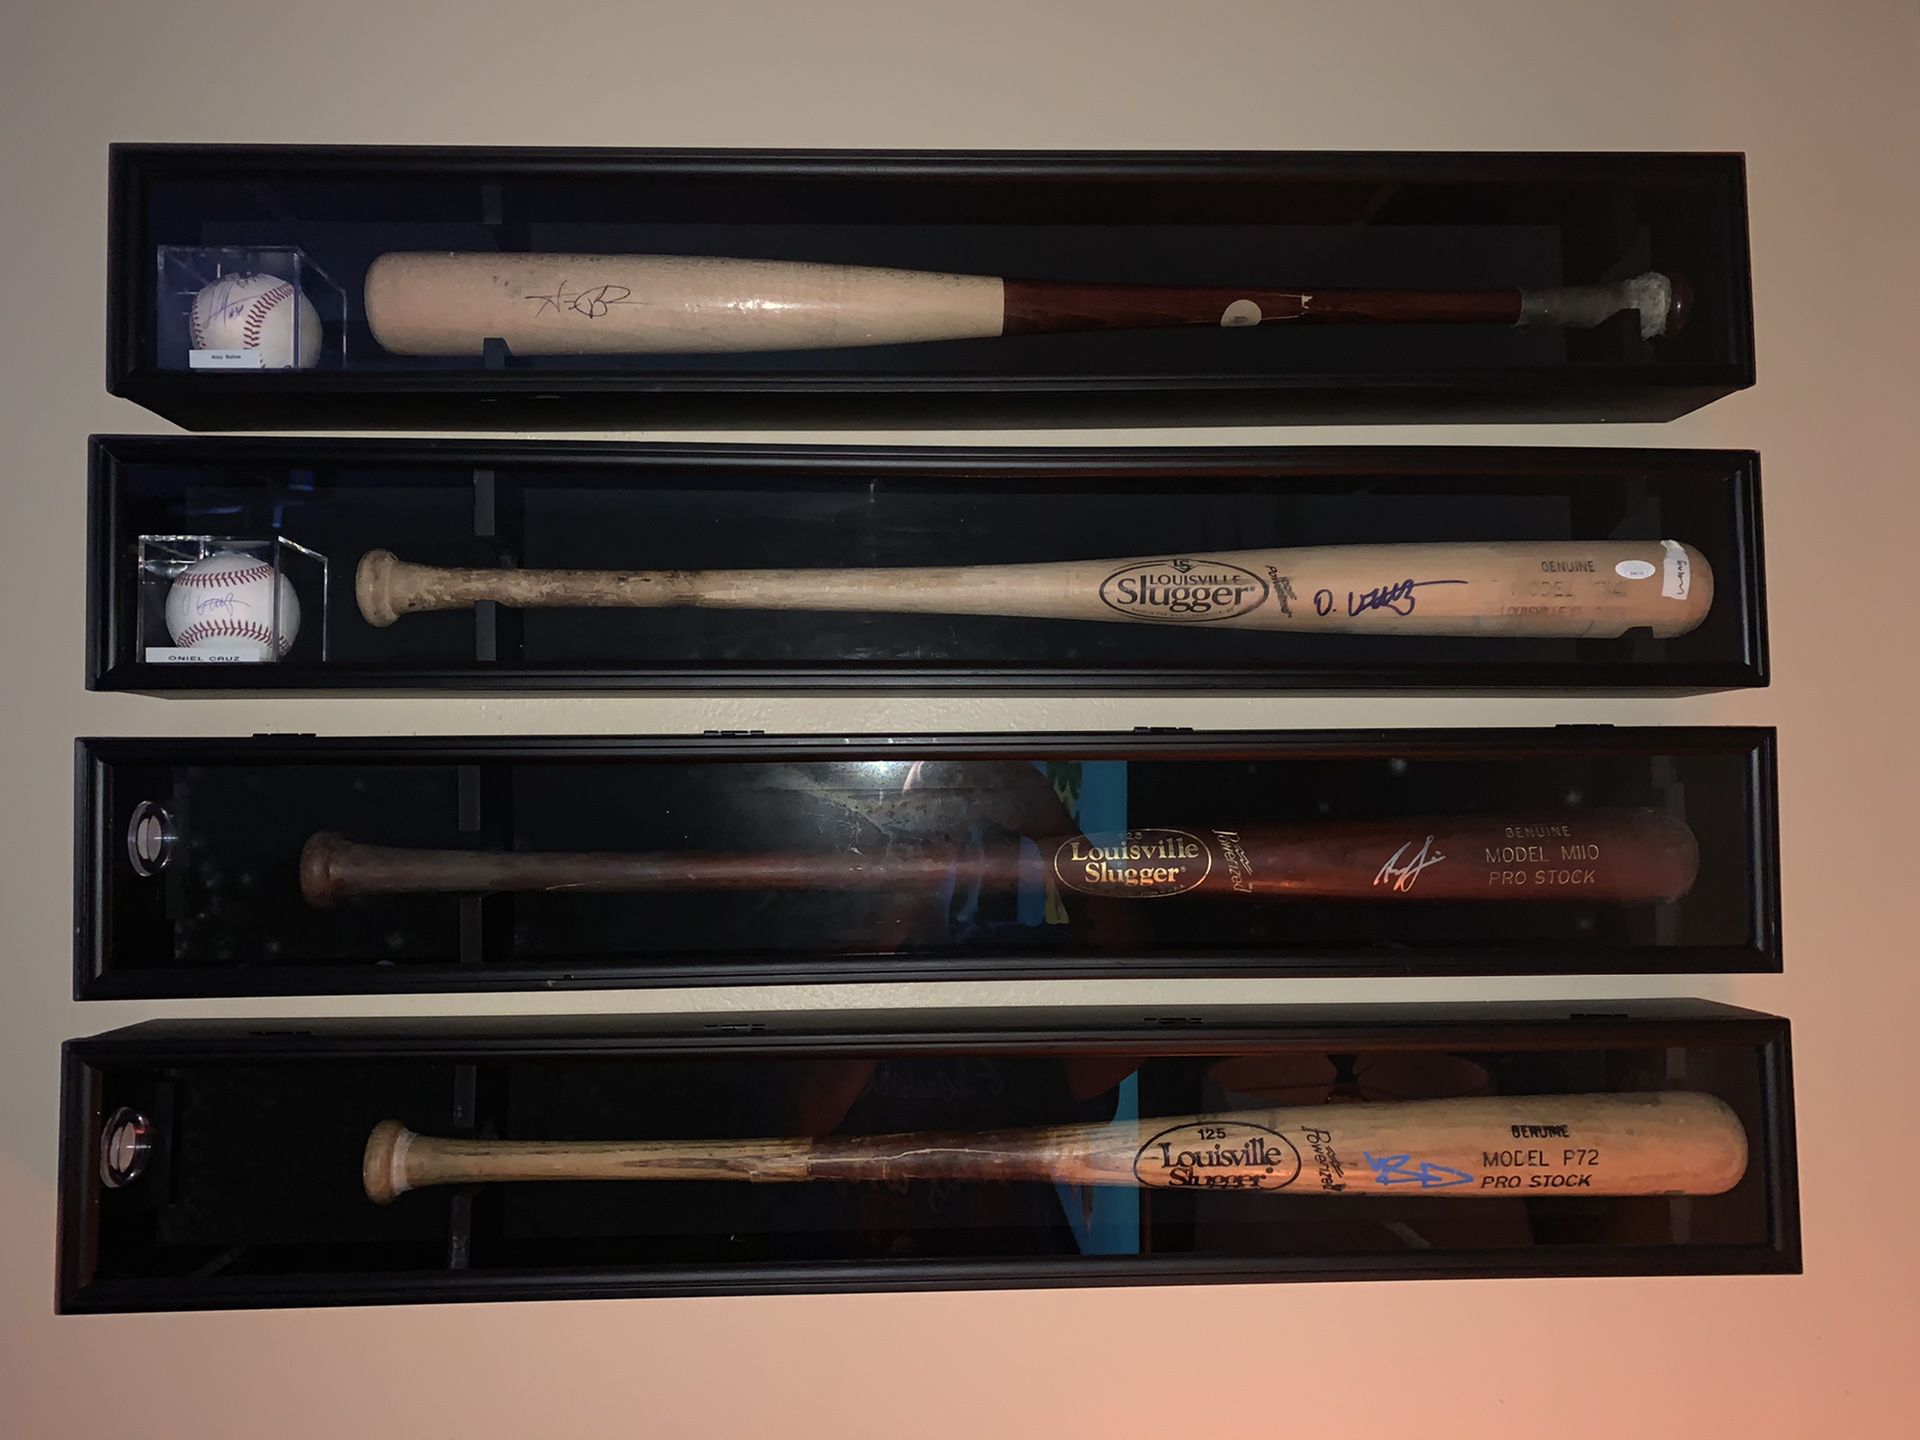 4 baseball bat display cases ( bats not included)sell together or separate price is per case